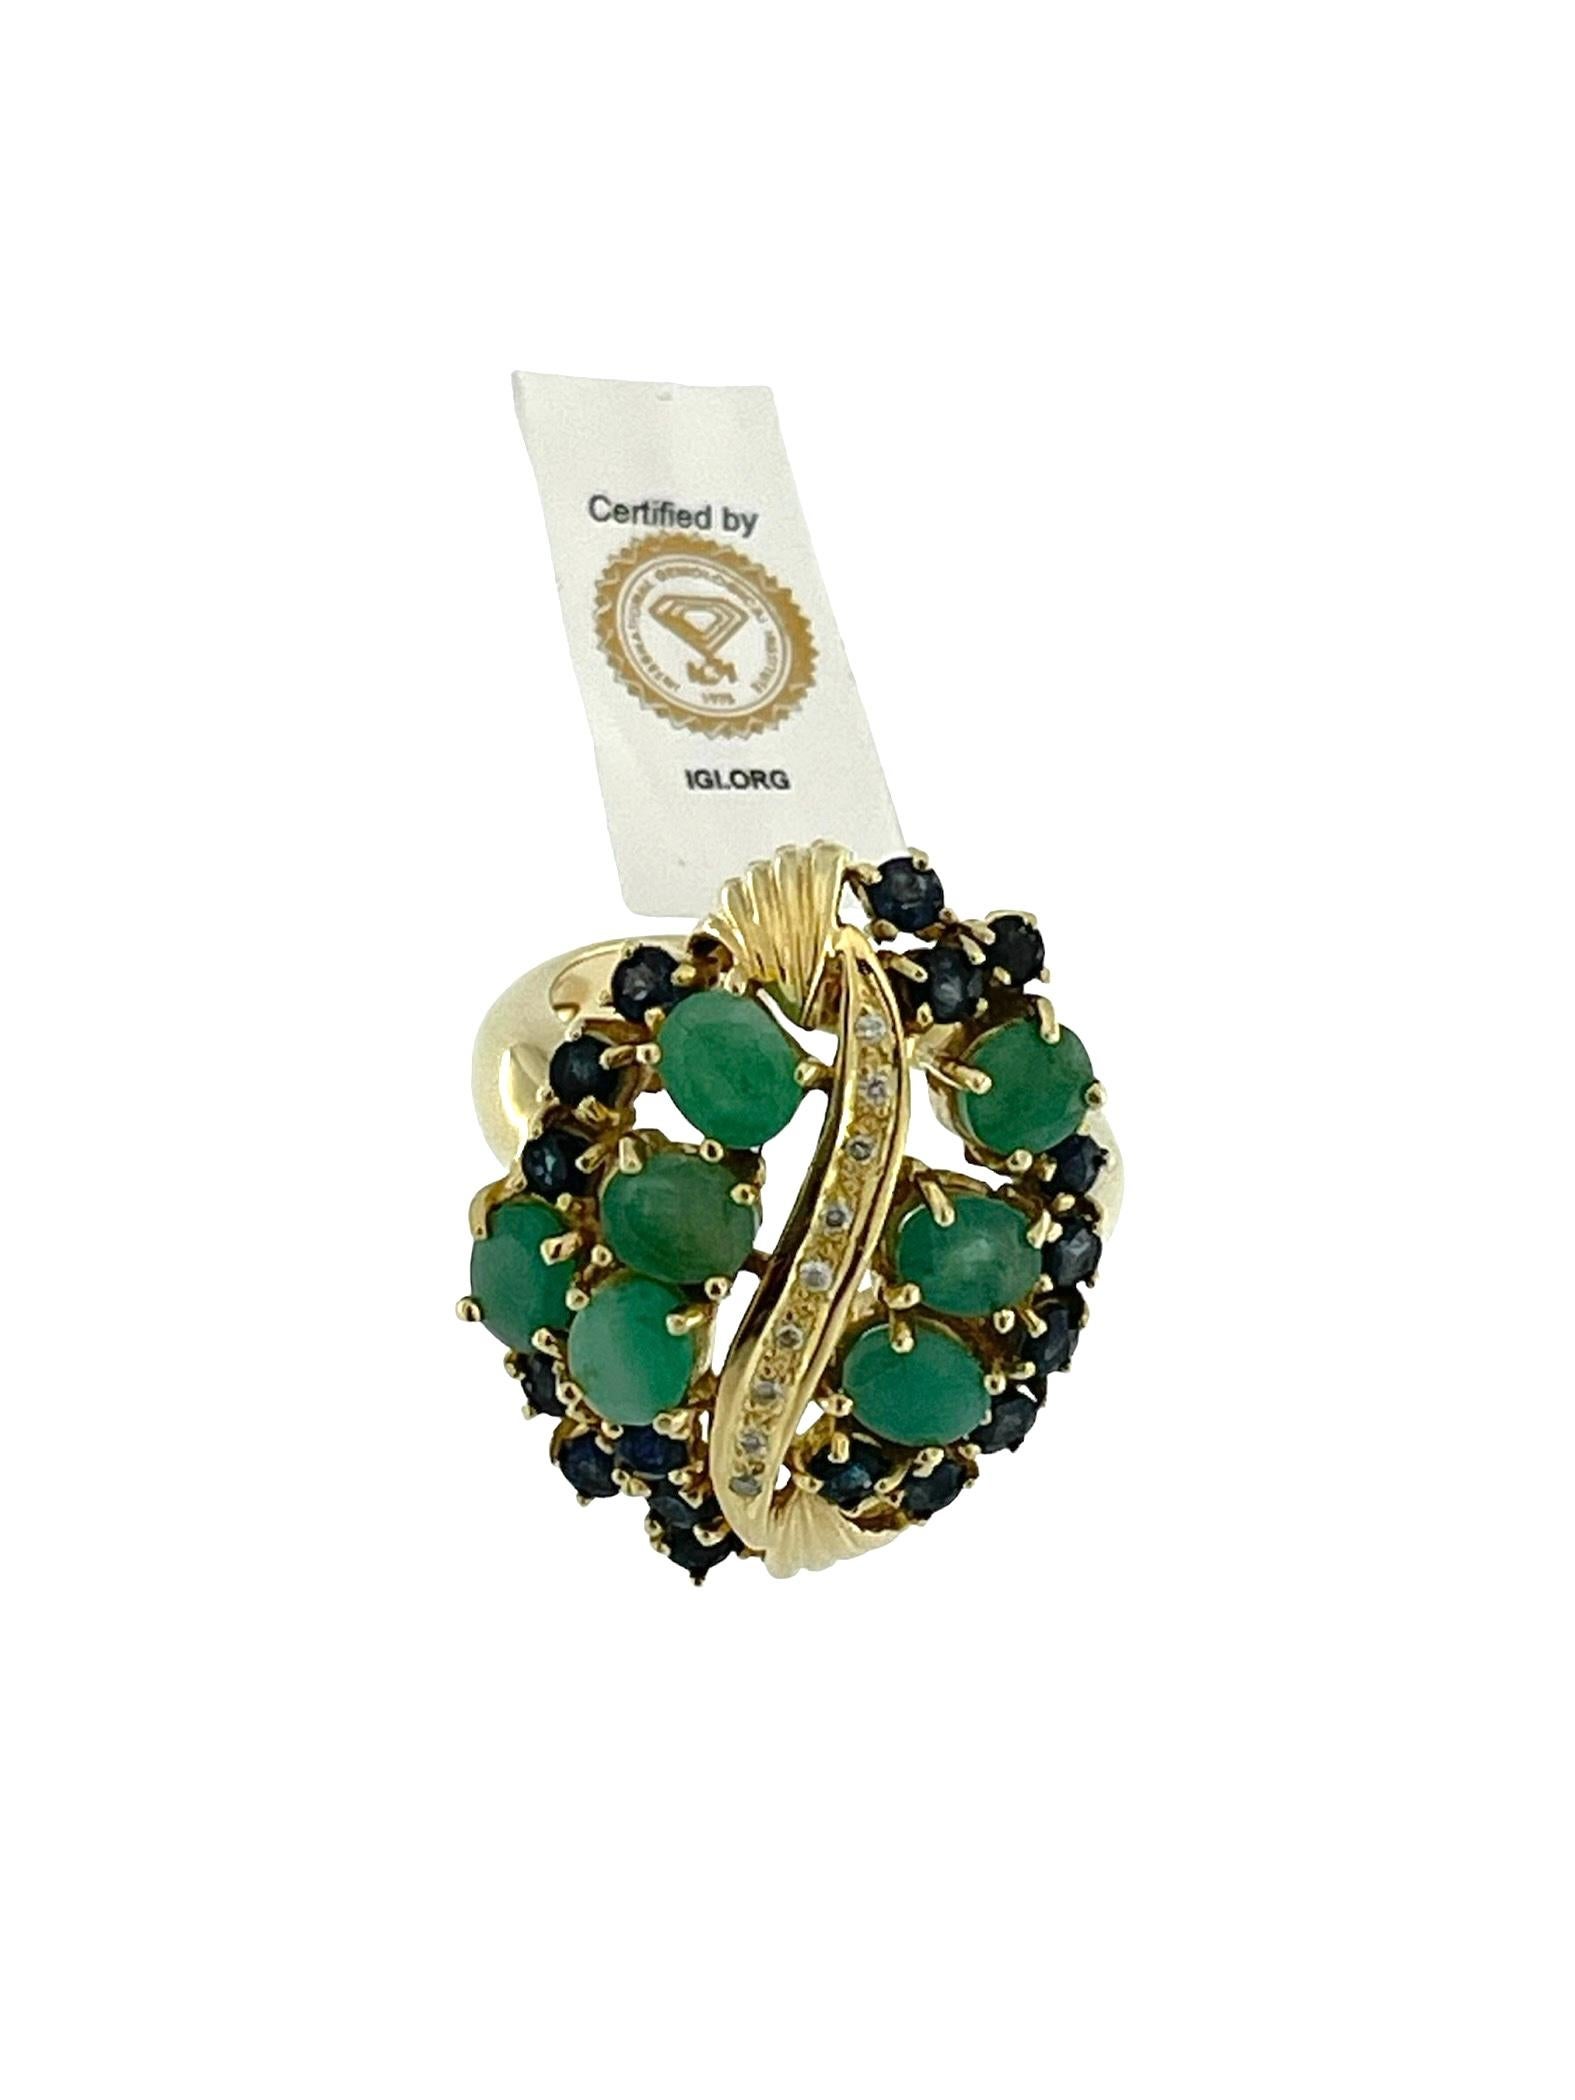 IGI Certified Yellow Gold Diamonds, Sapphires and Emeralds Cocktail Ring  For Sale 3